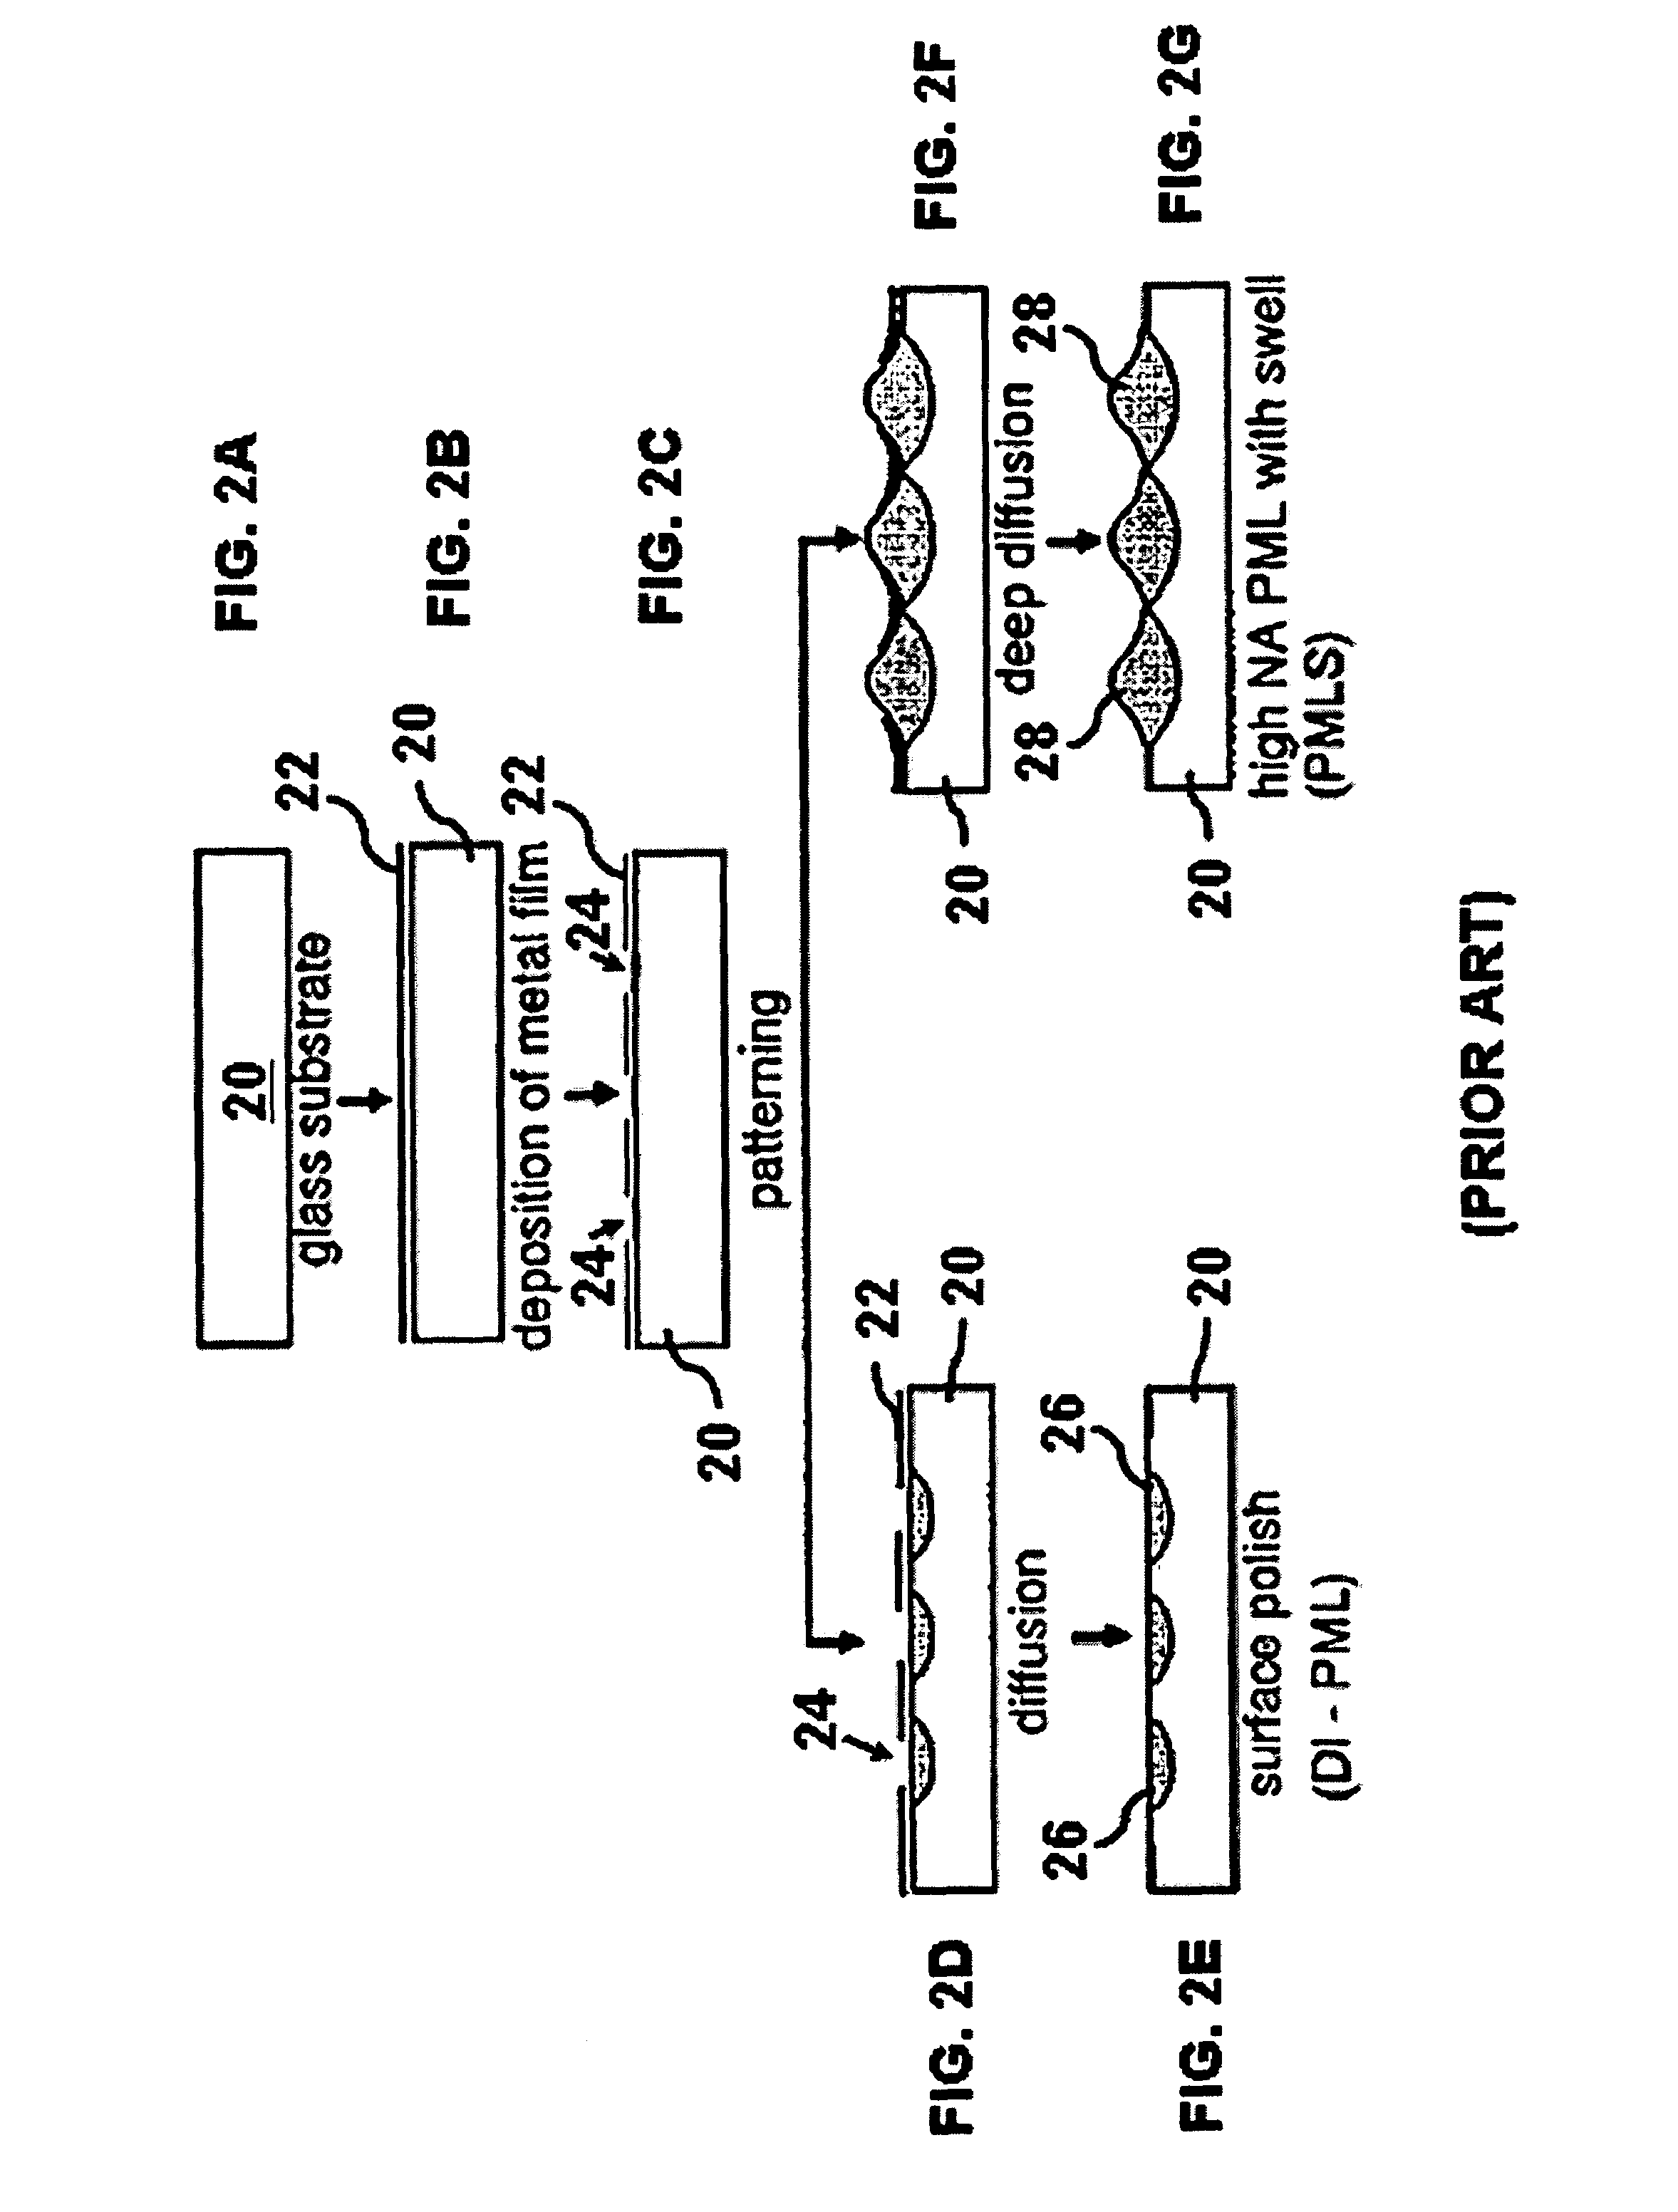 Lens array and method of making same